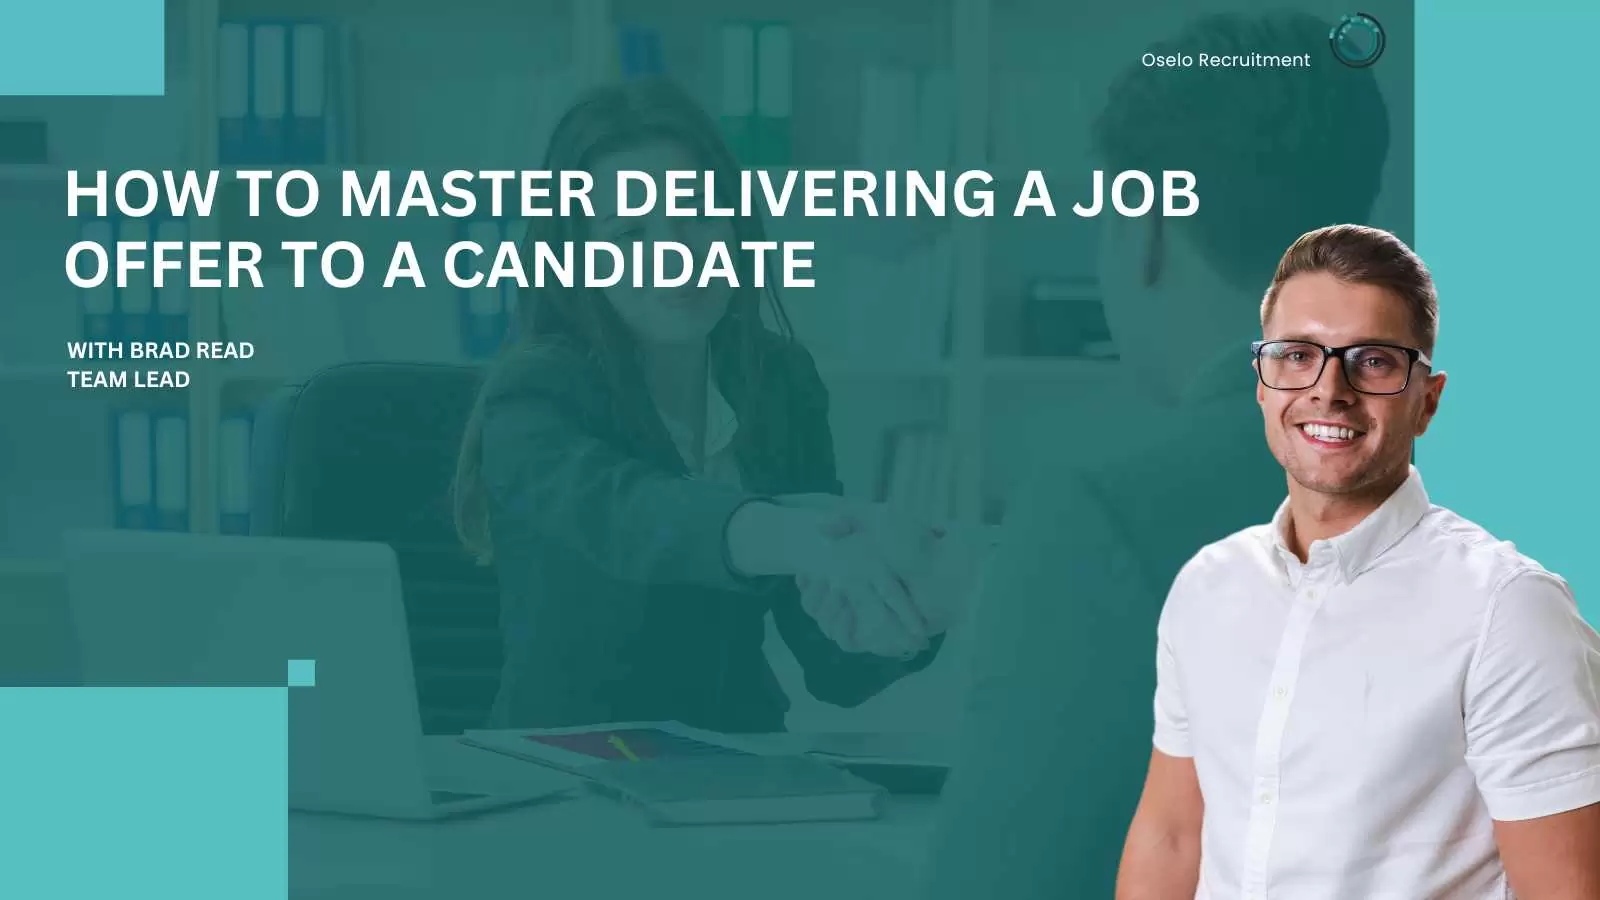 Mastering the Art of Delivering a Job Offer to a Candidate - Square (Twitter Post).jpg